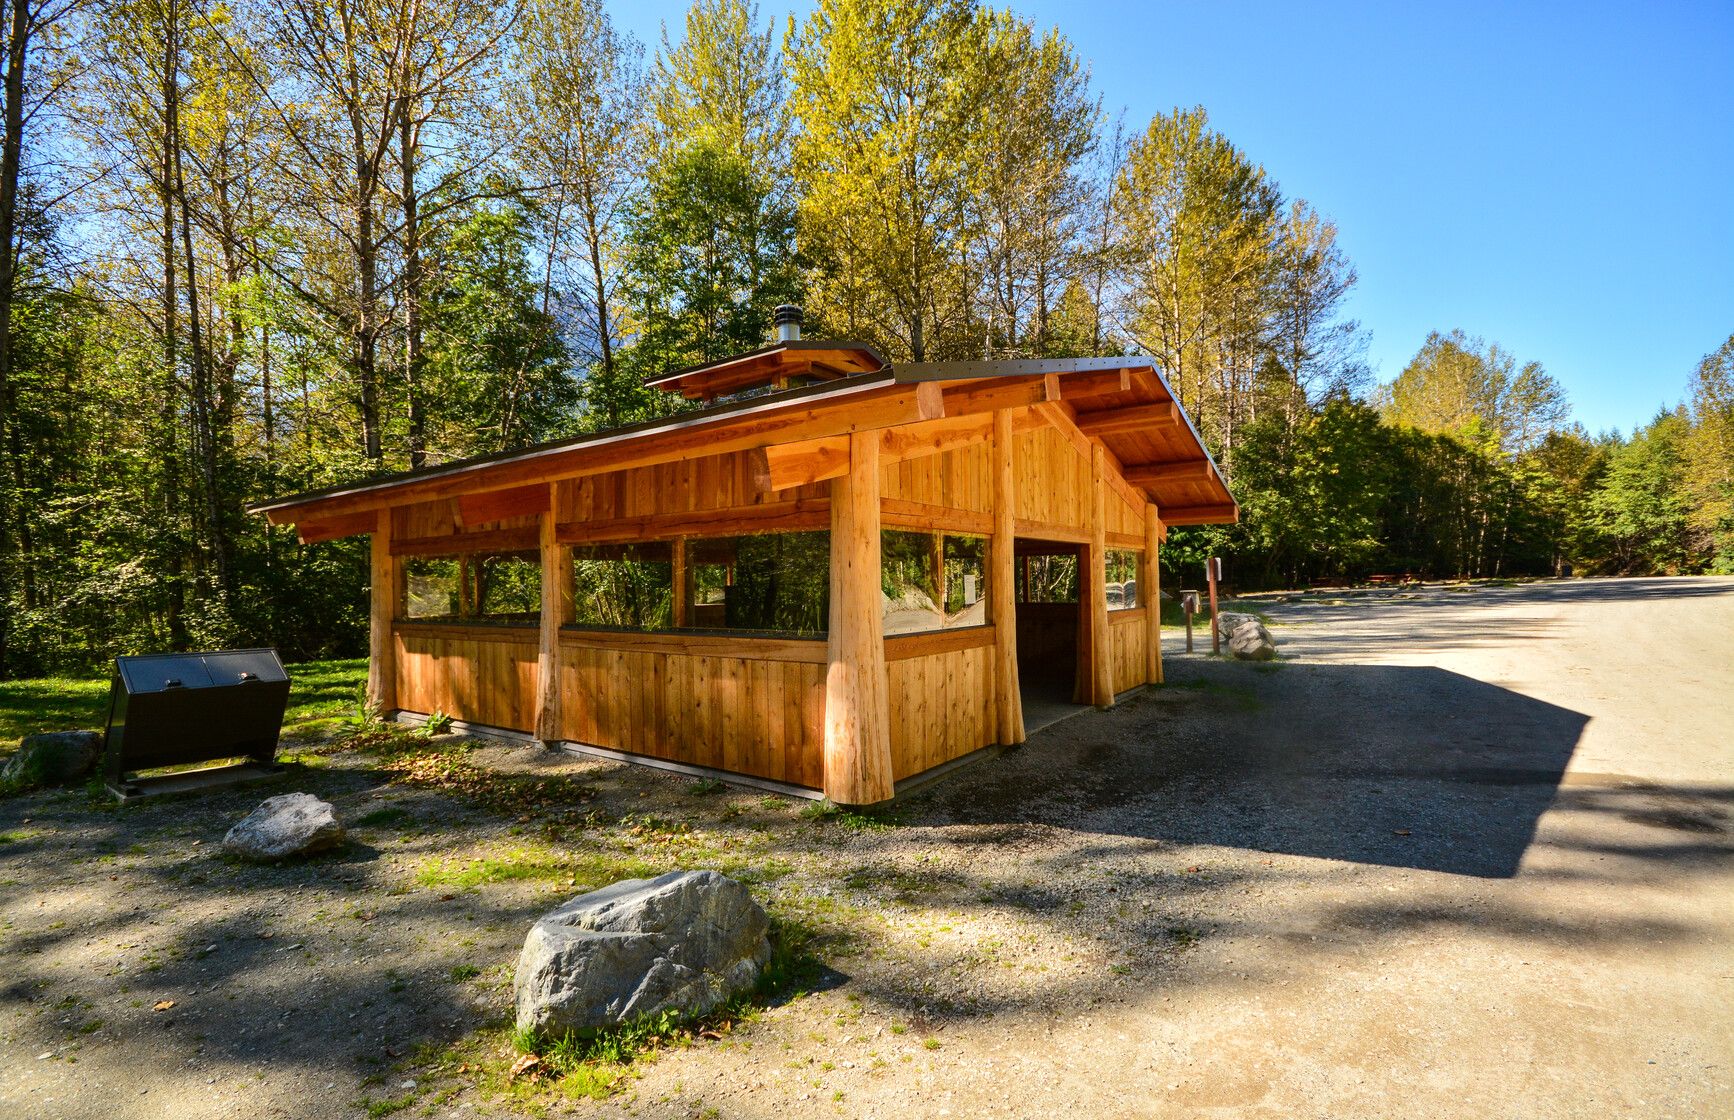 Fisheries Pool Campground shelter in Tweedsmuir Park. Inside the shelter are picnic tables and a fireplace.